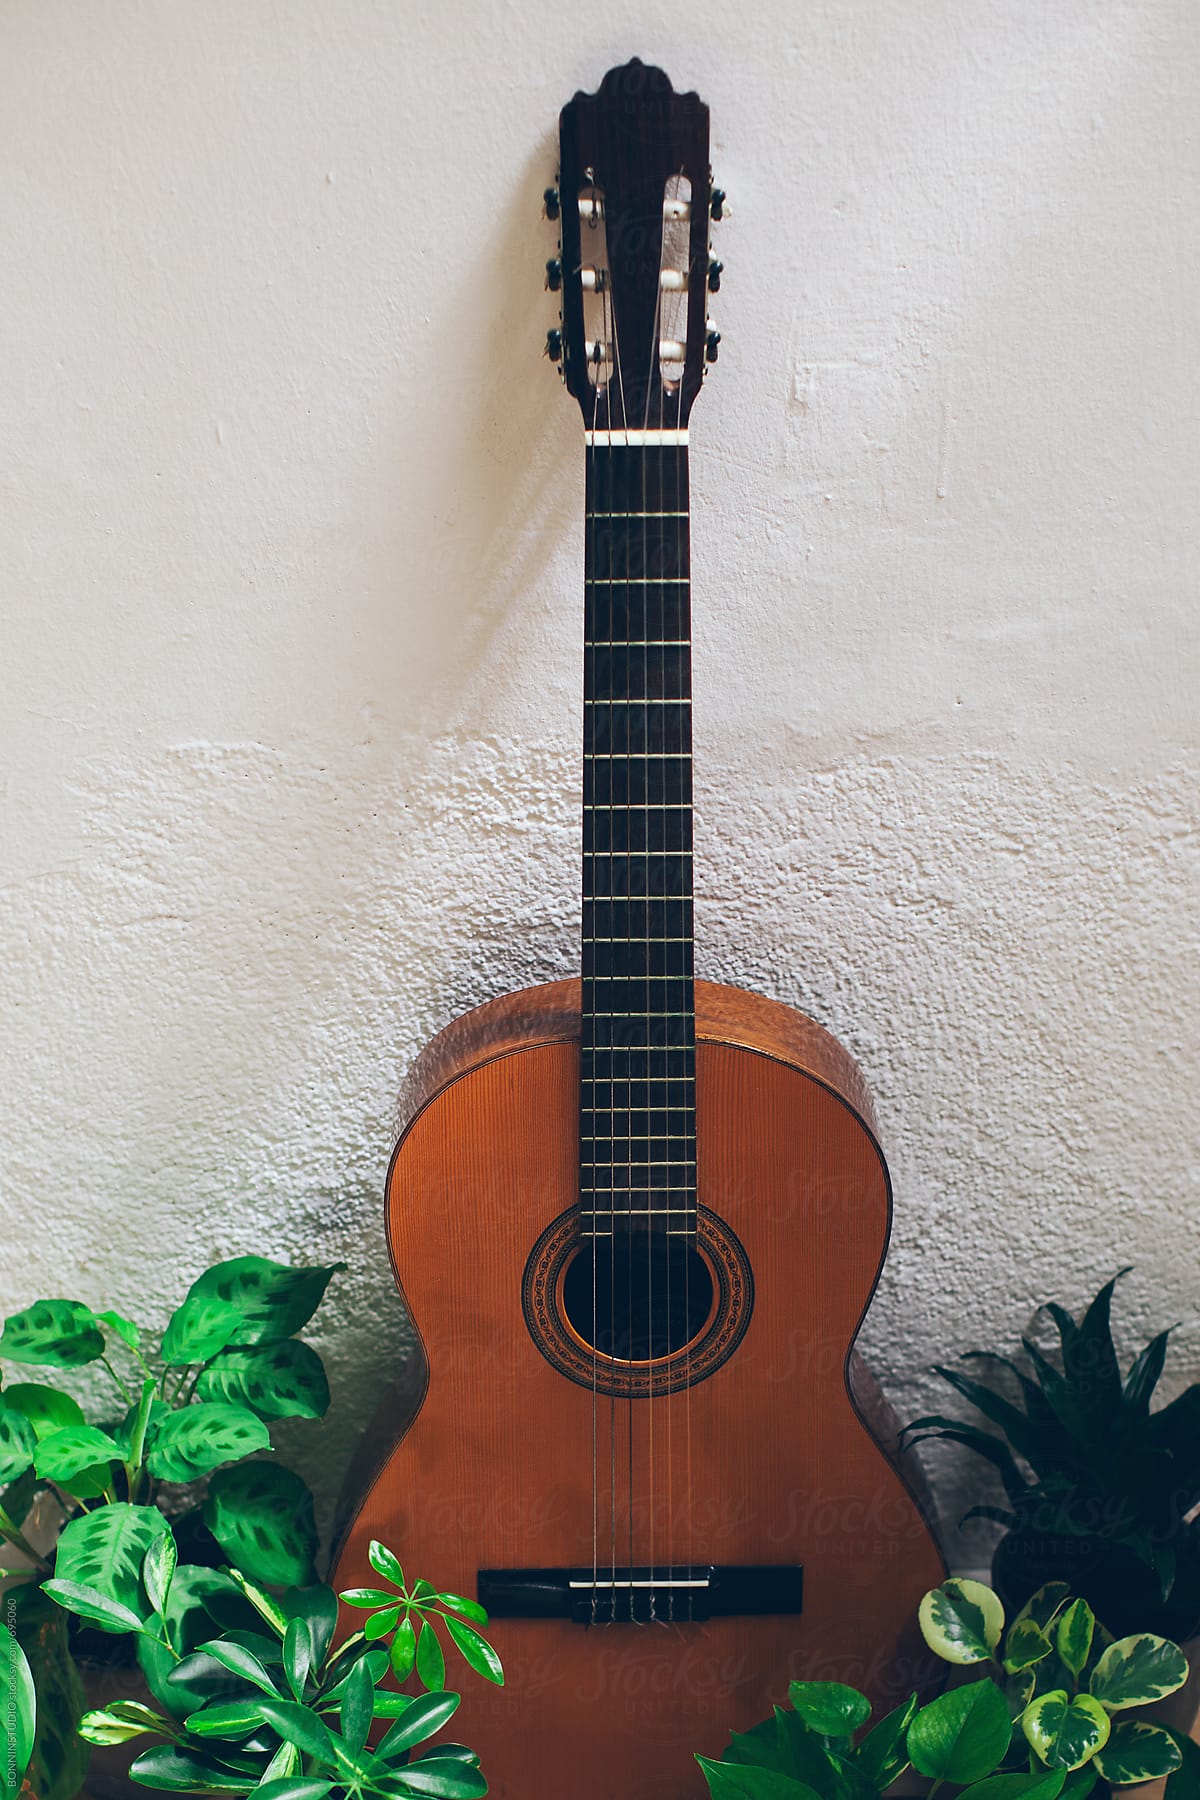 Spanish acoustic guitar standing around the plants.